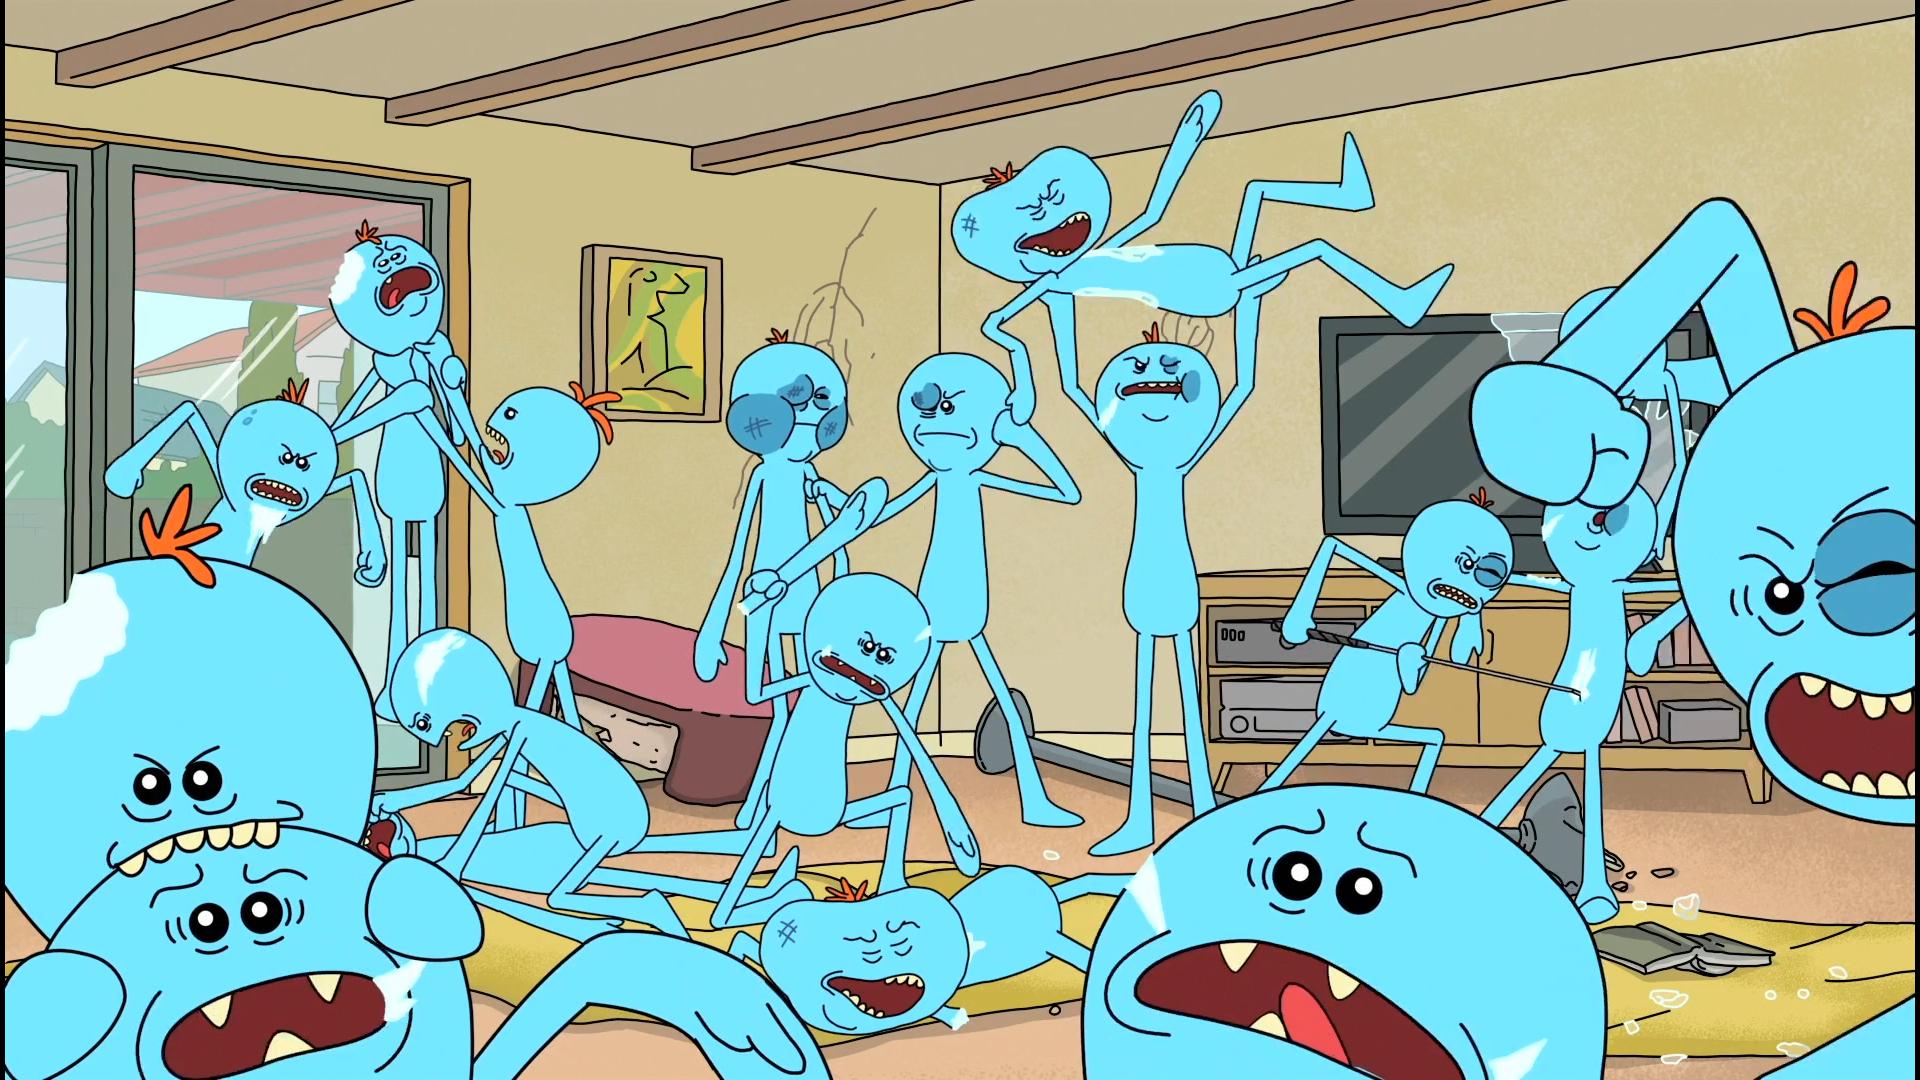 1080p Mr Meeseeks (Rick And Morty) Hd Images